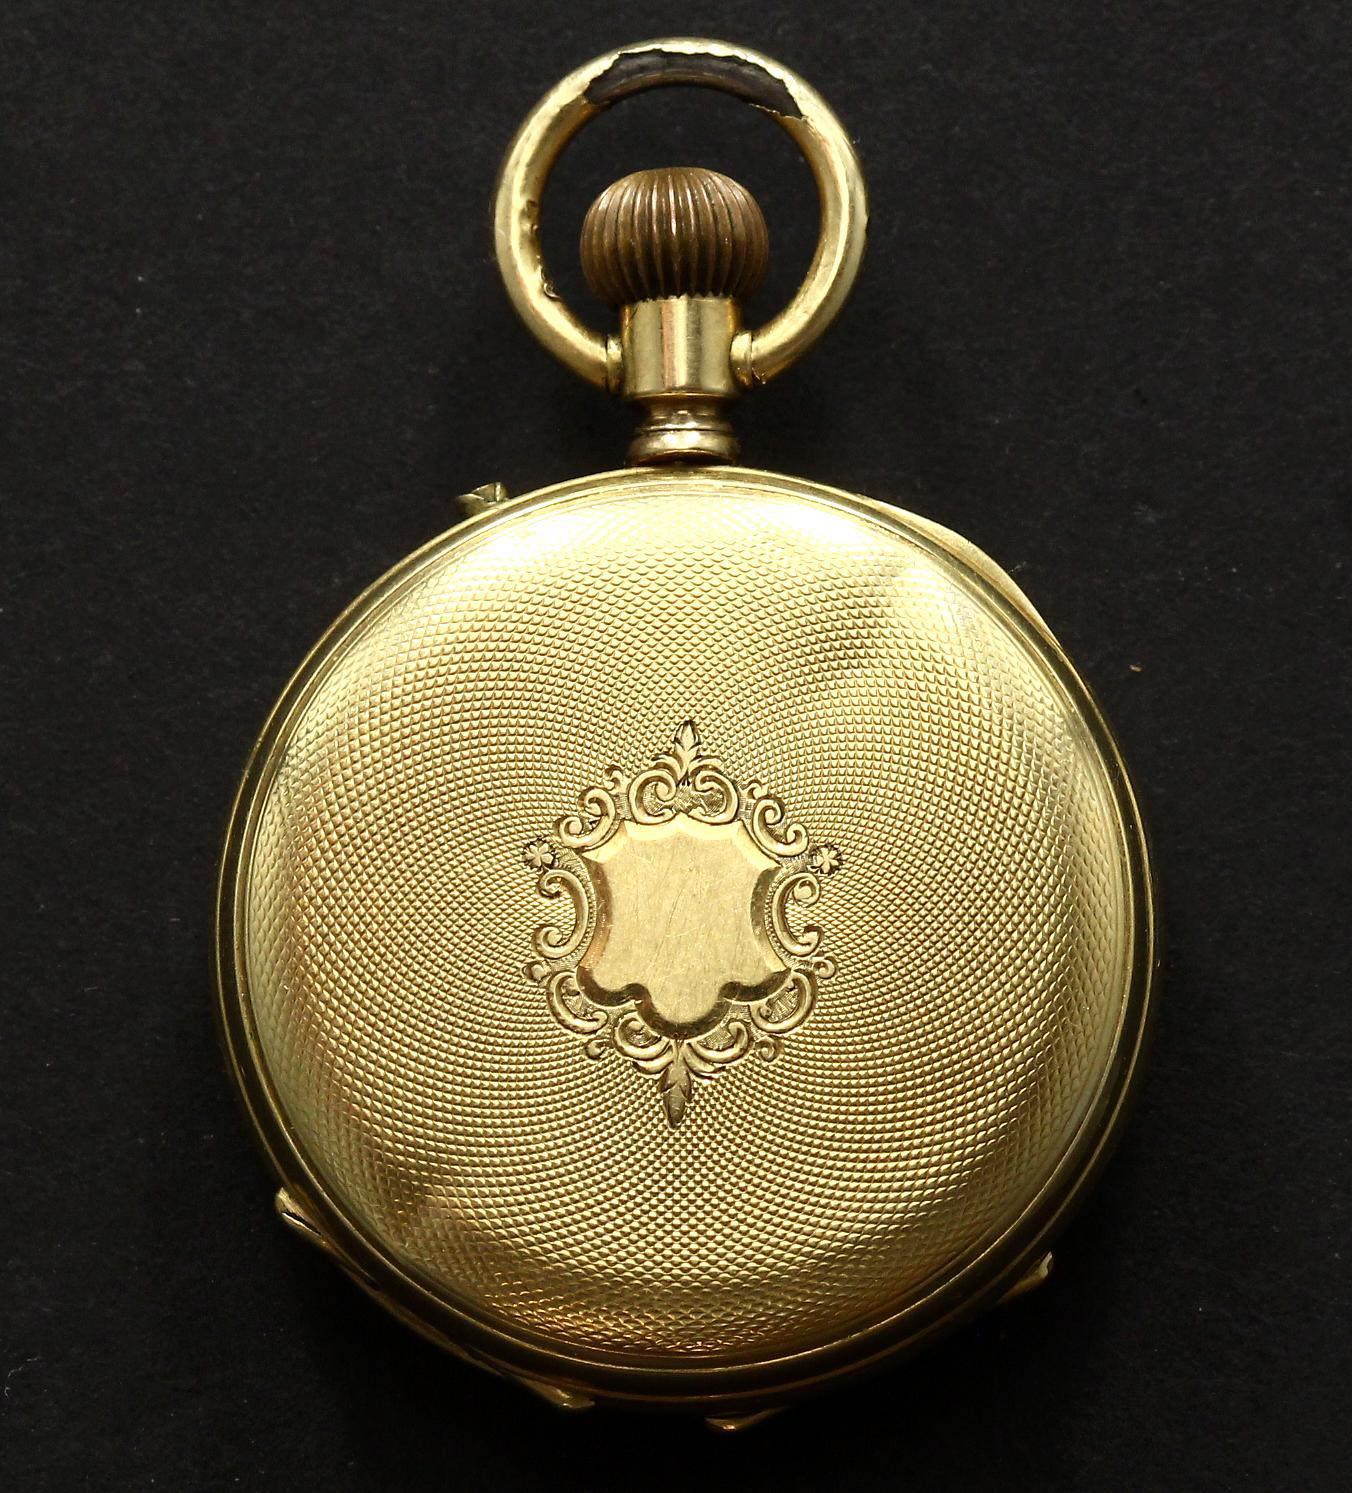 Noname Small Gold Pocket Watches